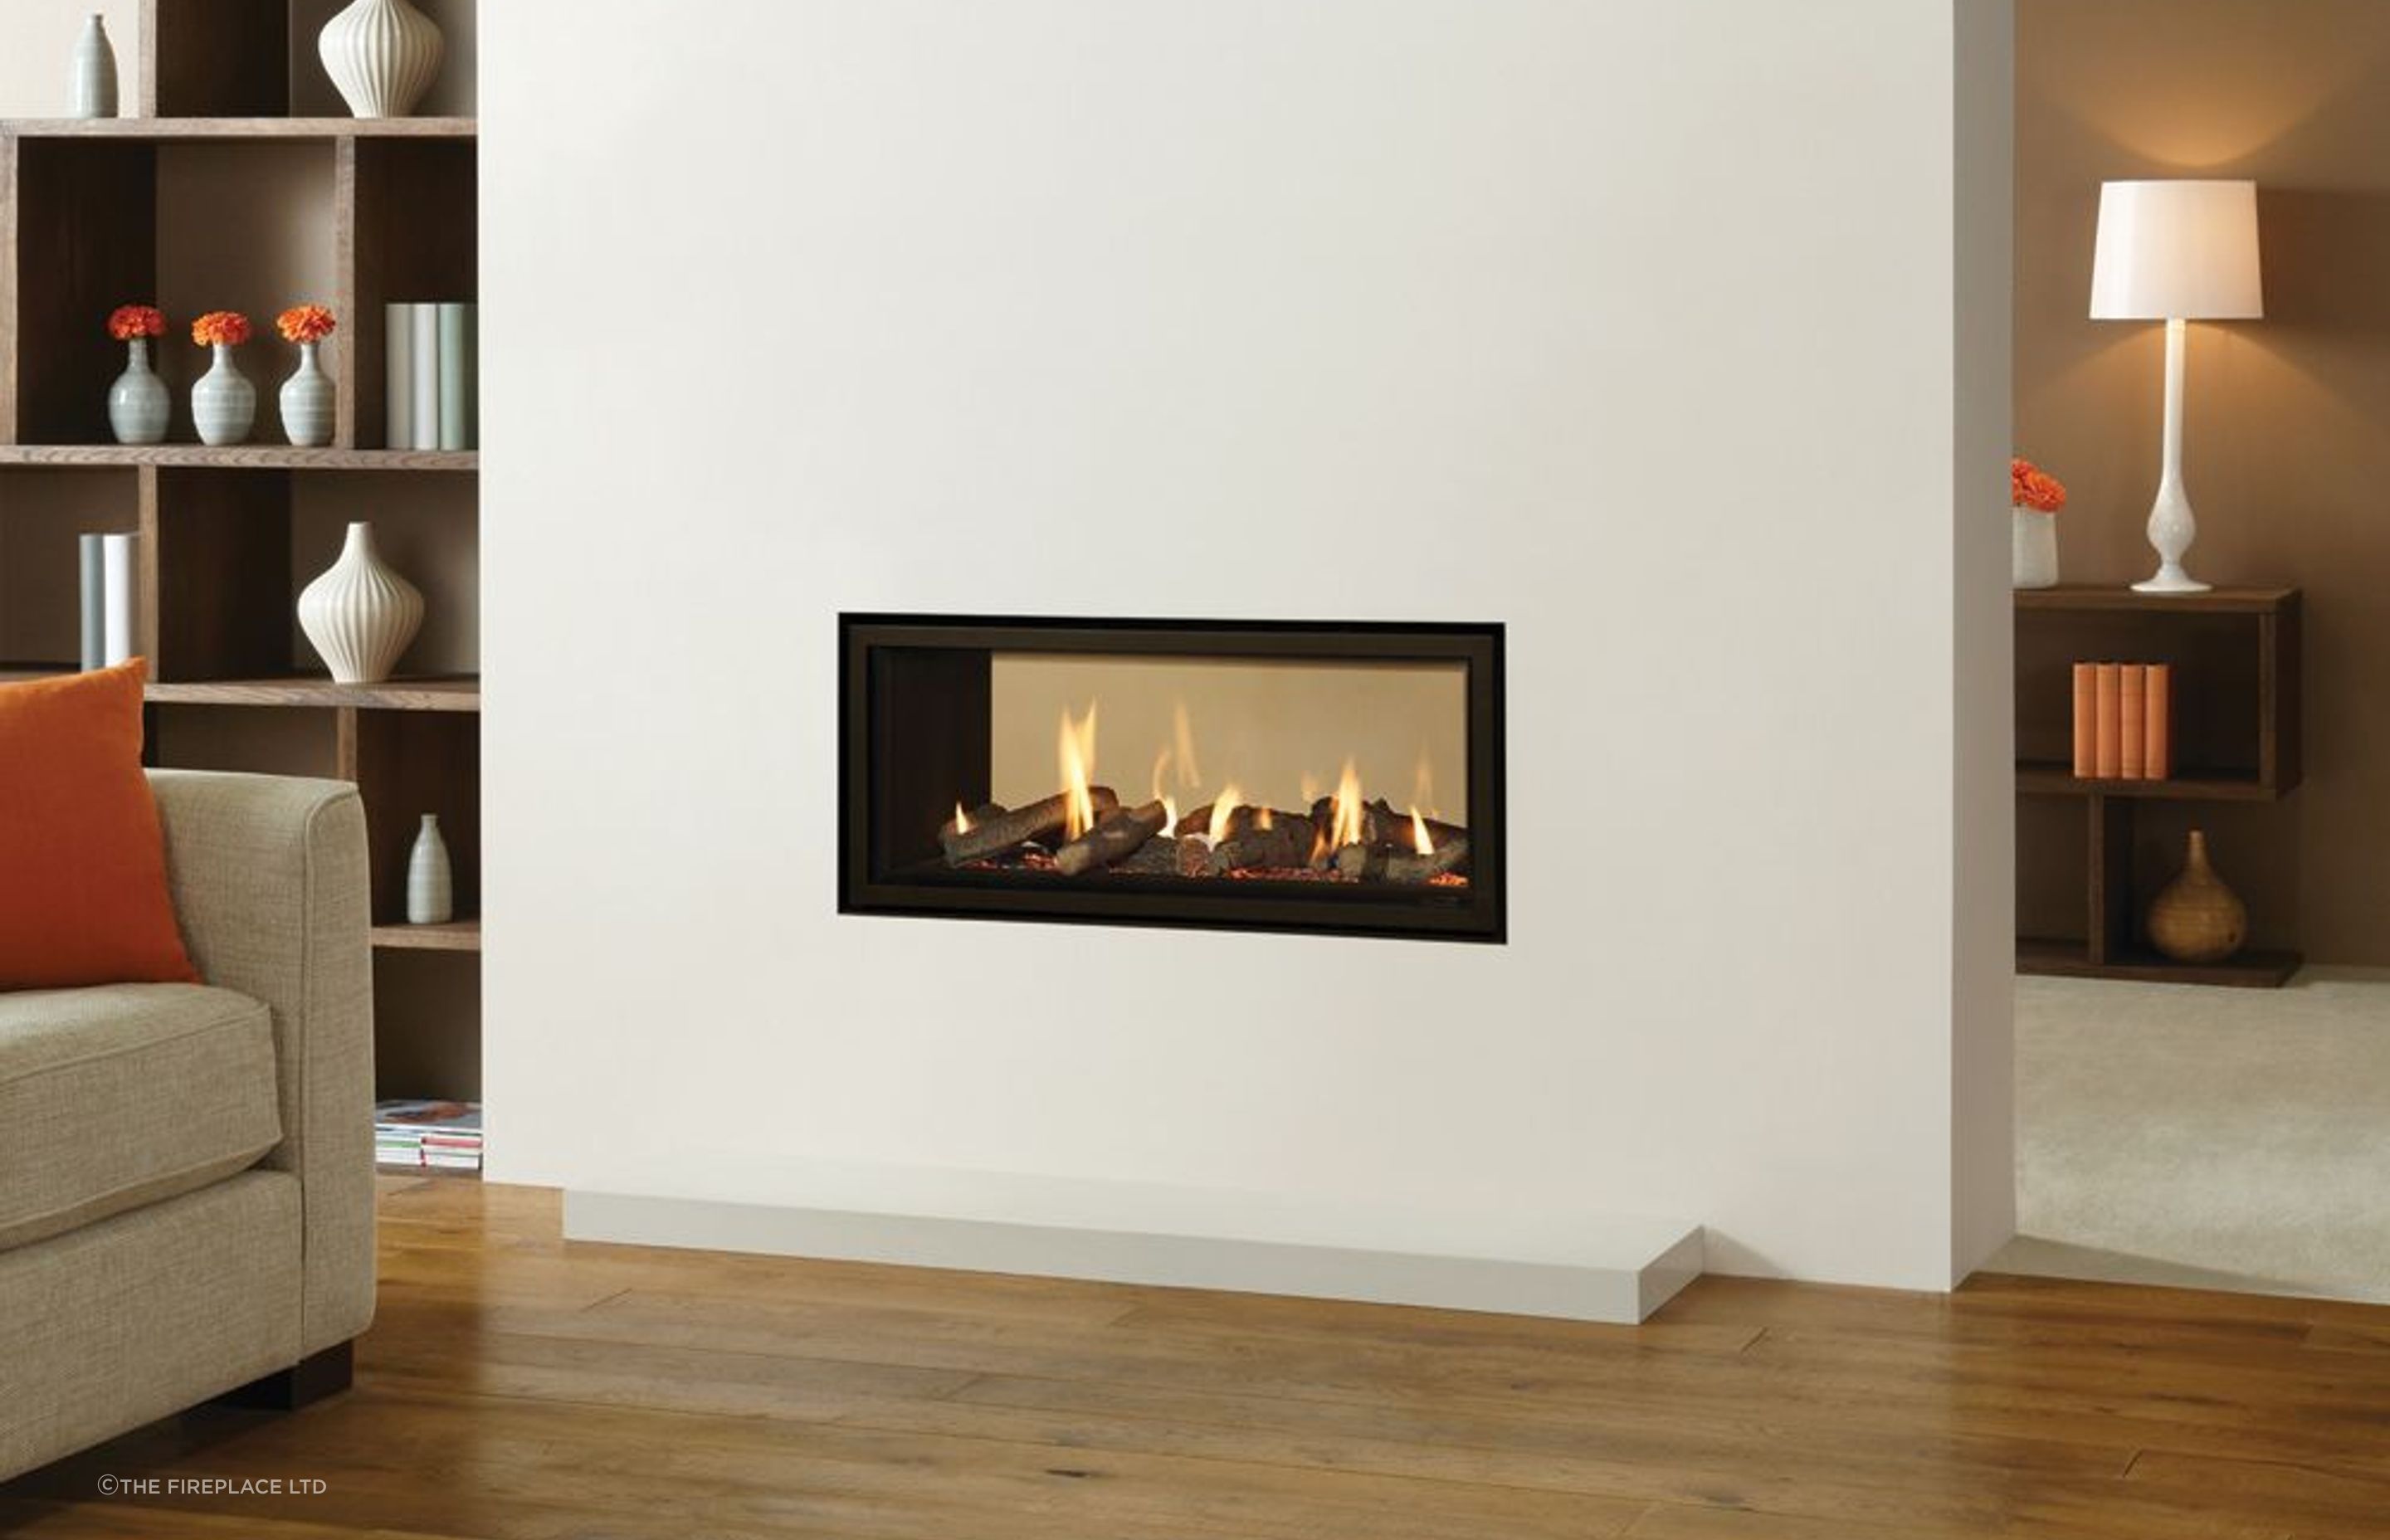 Double sided fires can provide a unique visual appeal and heat in two spaces at once.